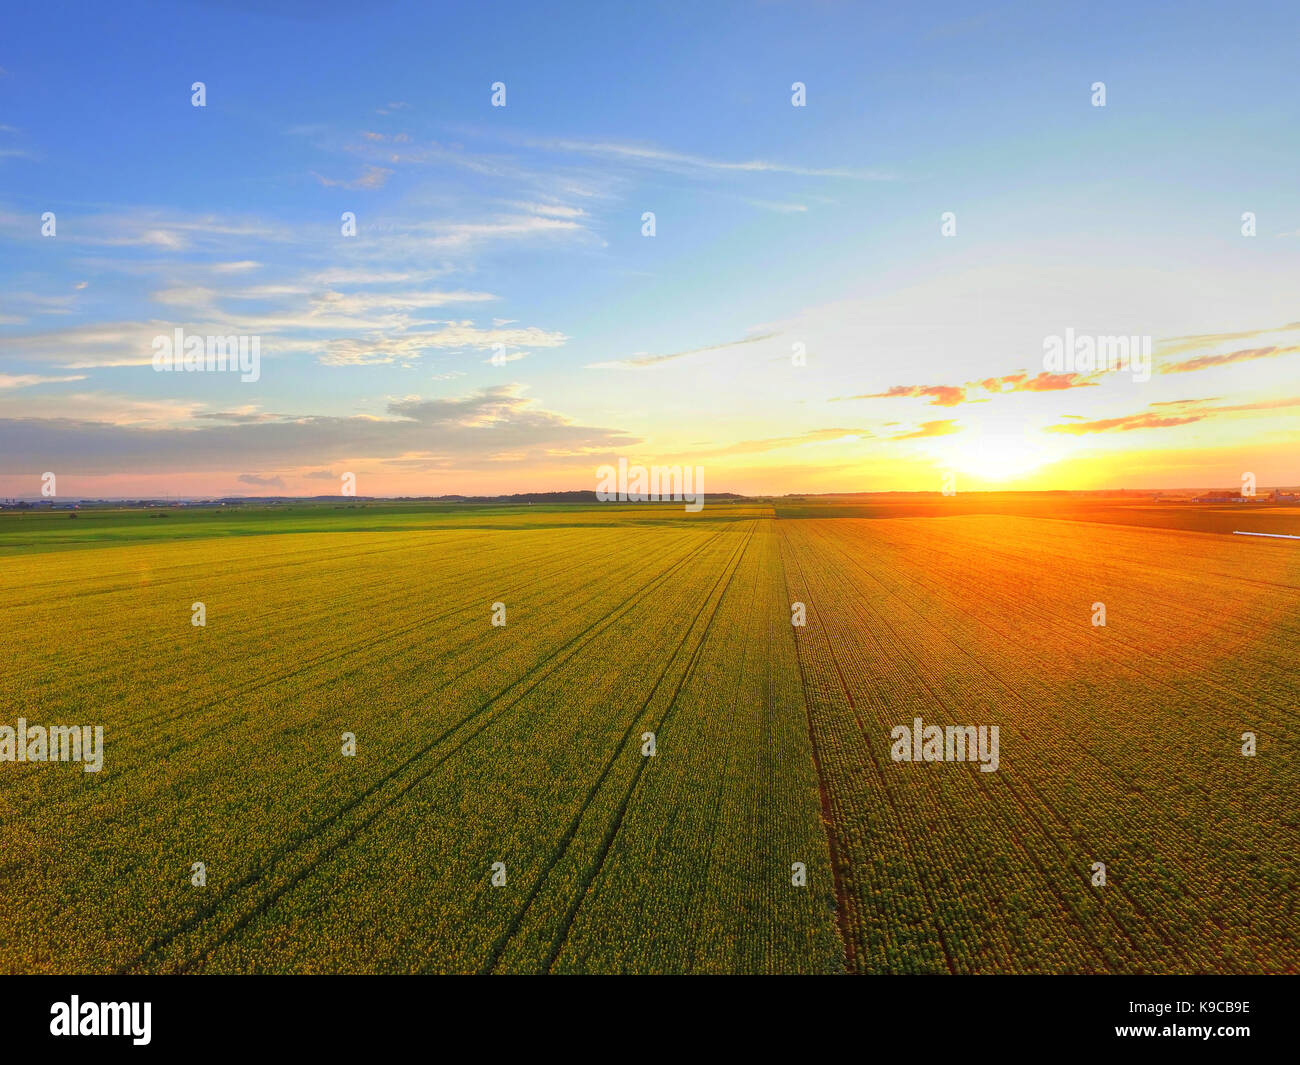 Aerial view of sunset over canola field Stock Photo